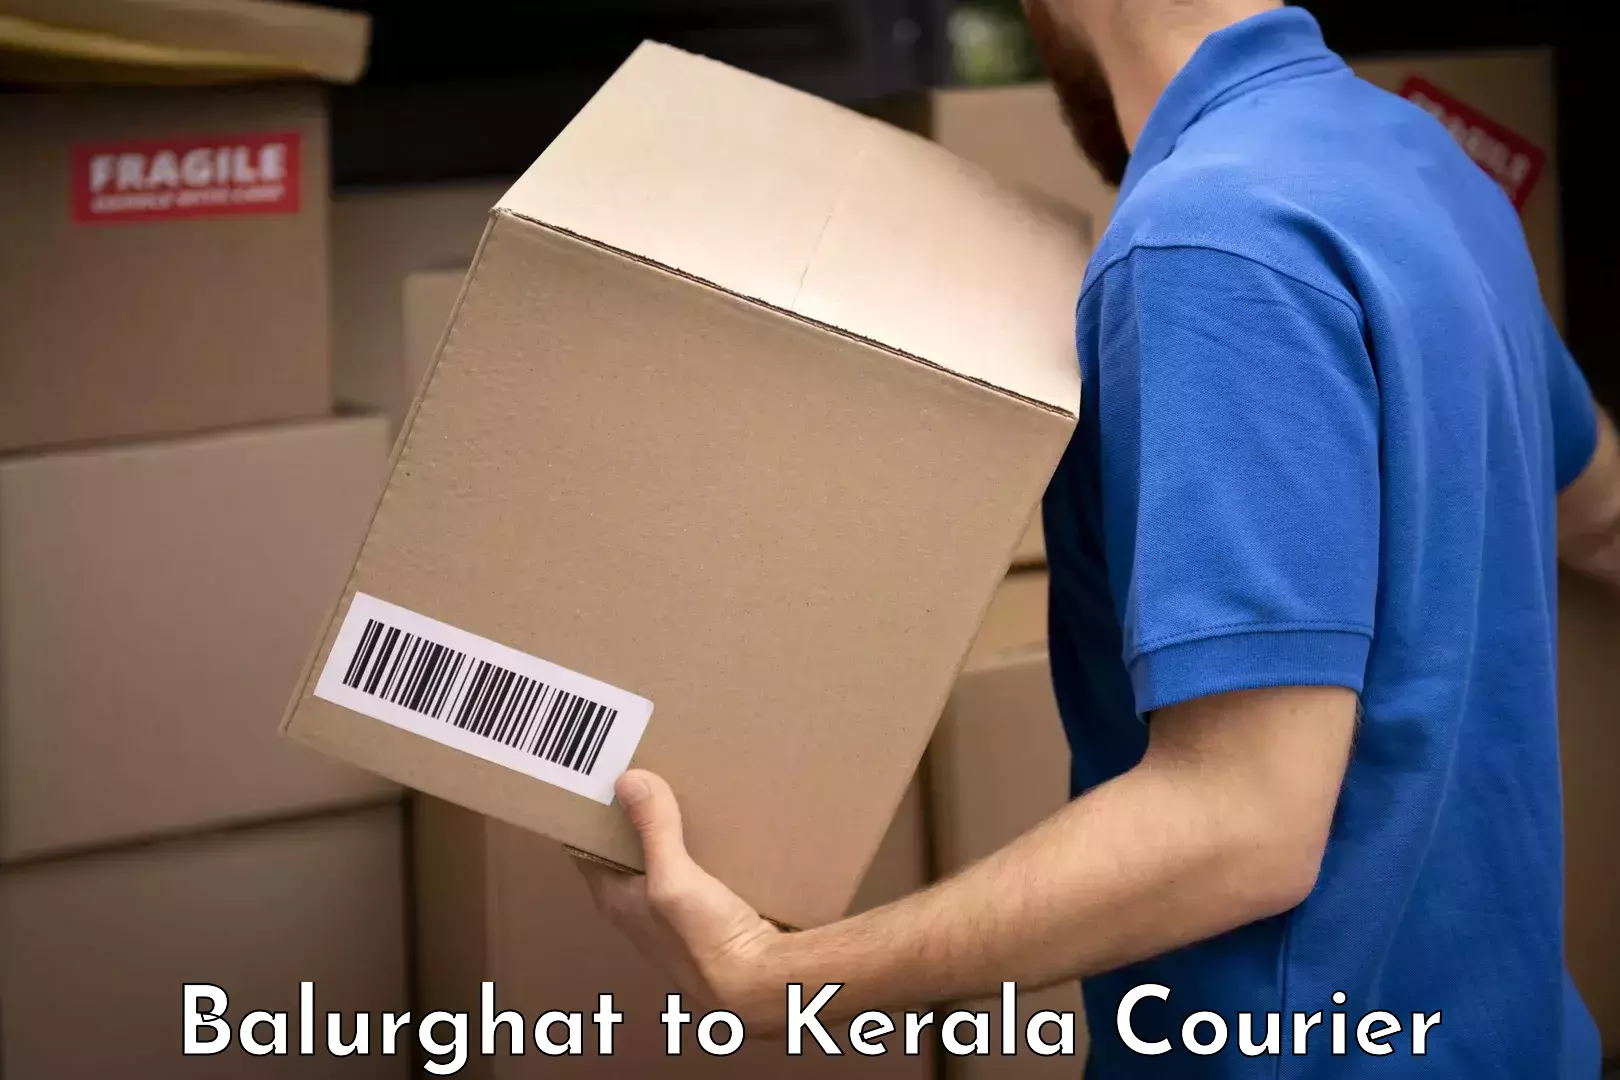 Luggage shipment specialists Balurghat to Munnar